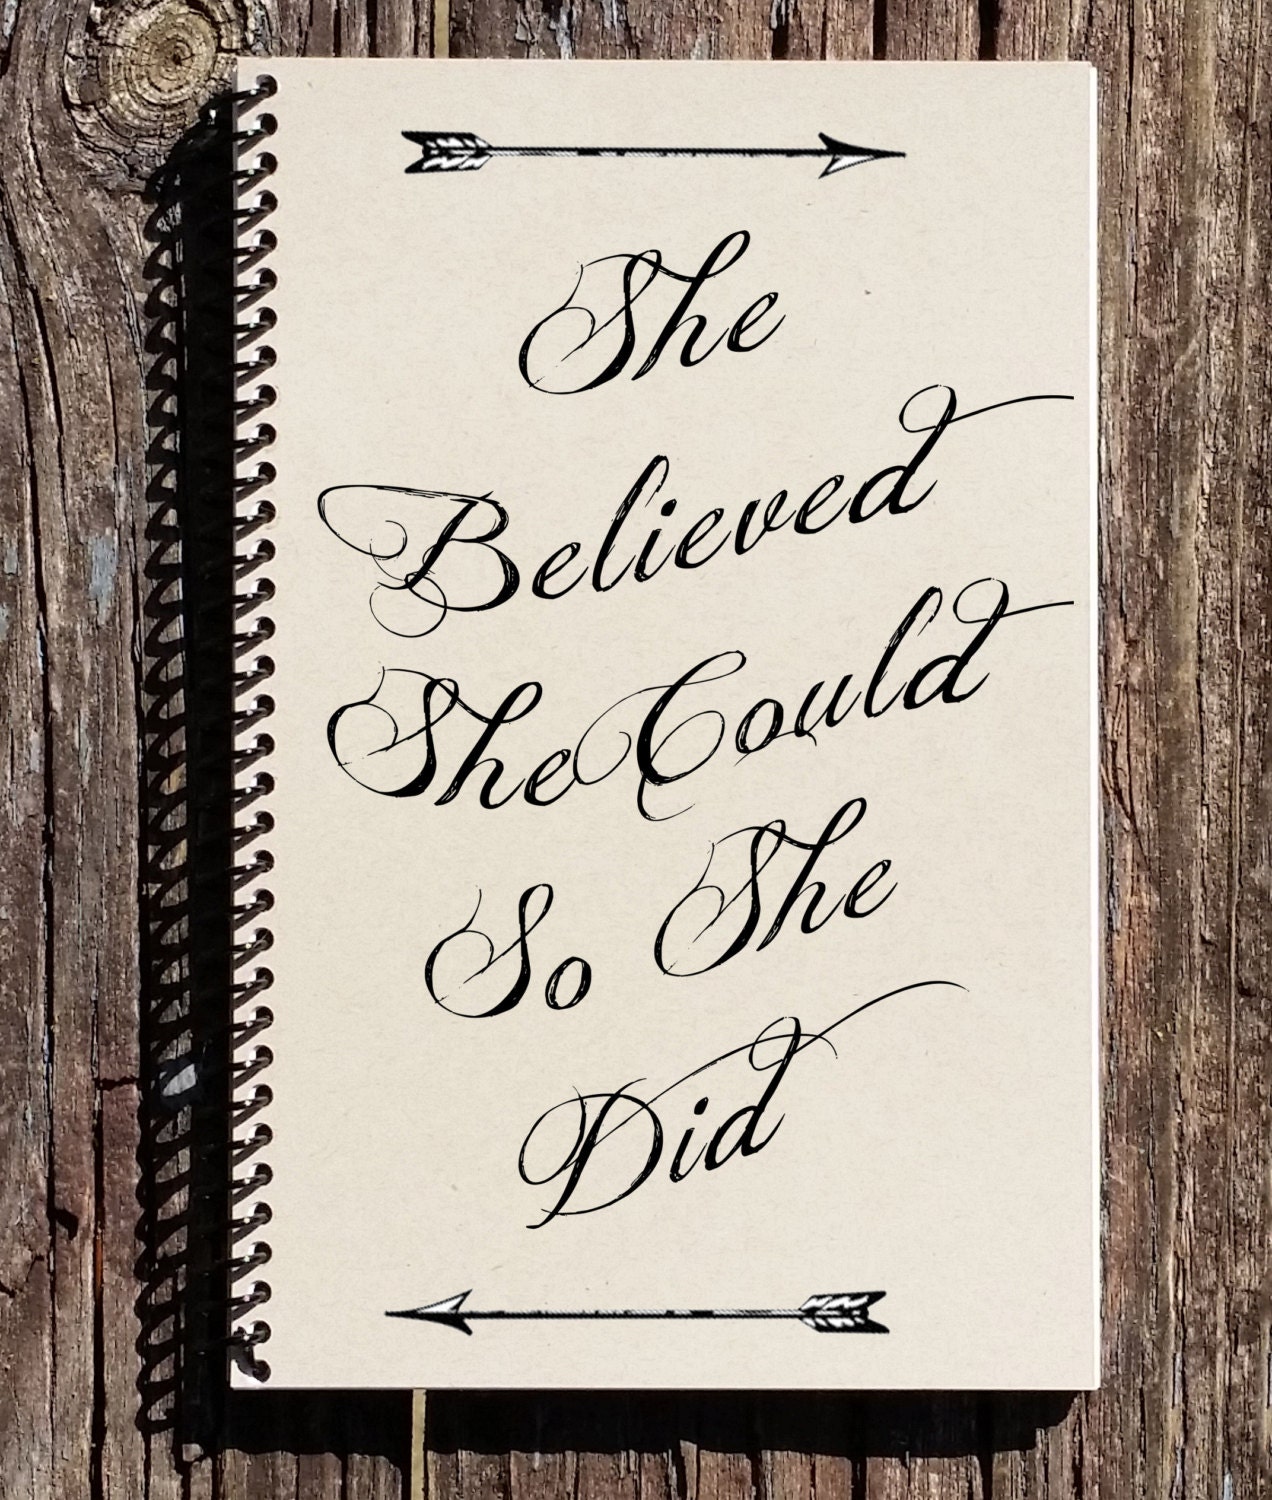 She Believed She Could so She Did Notebook Gift for image pic